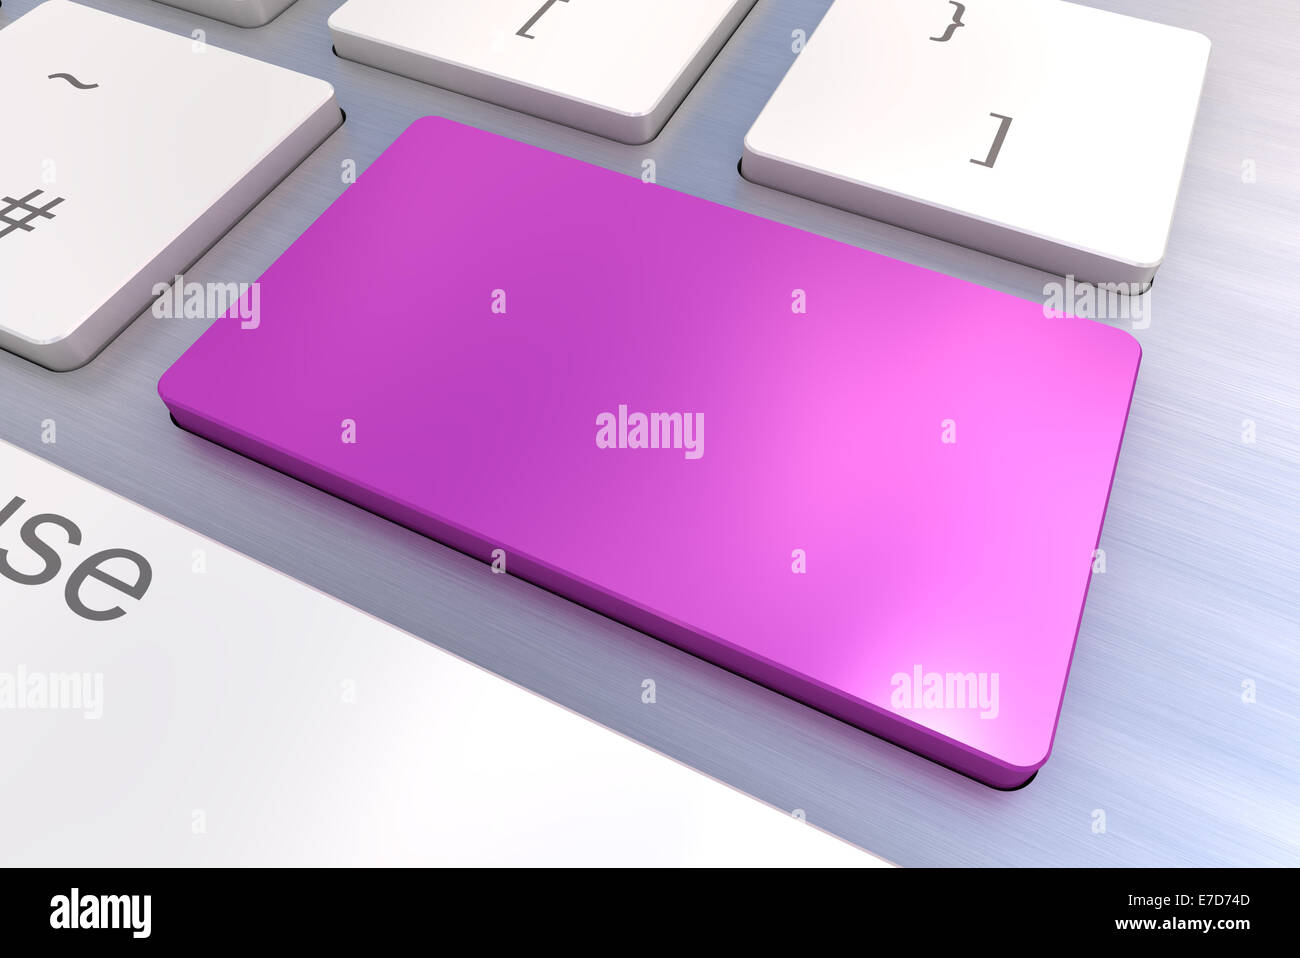 A Colourful 3d Rendered Illustration showing a Blank Purple Keyboard concept on a Computer Keyboard Stock Photo